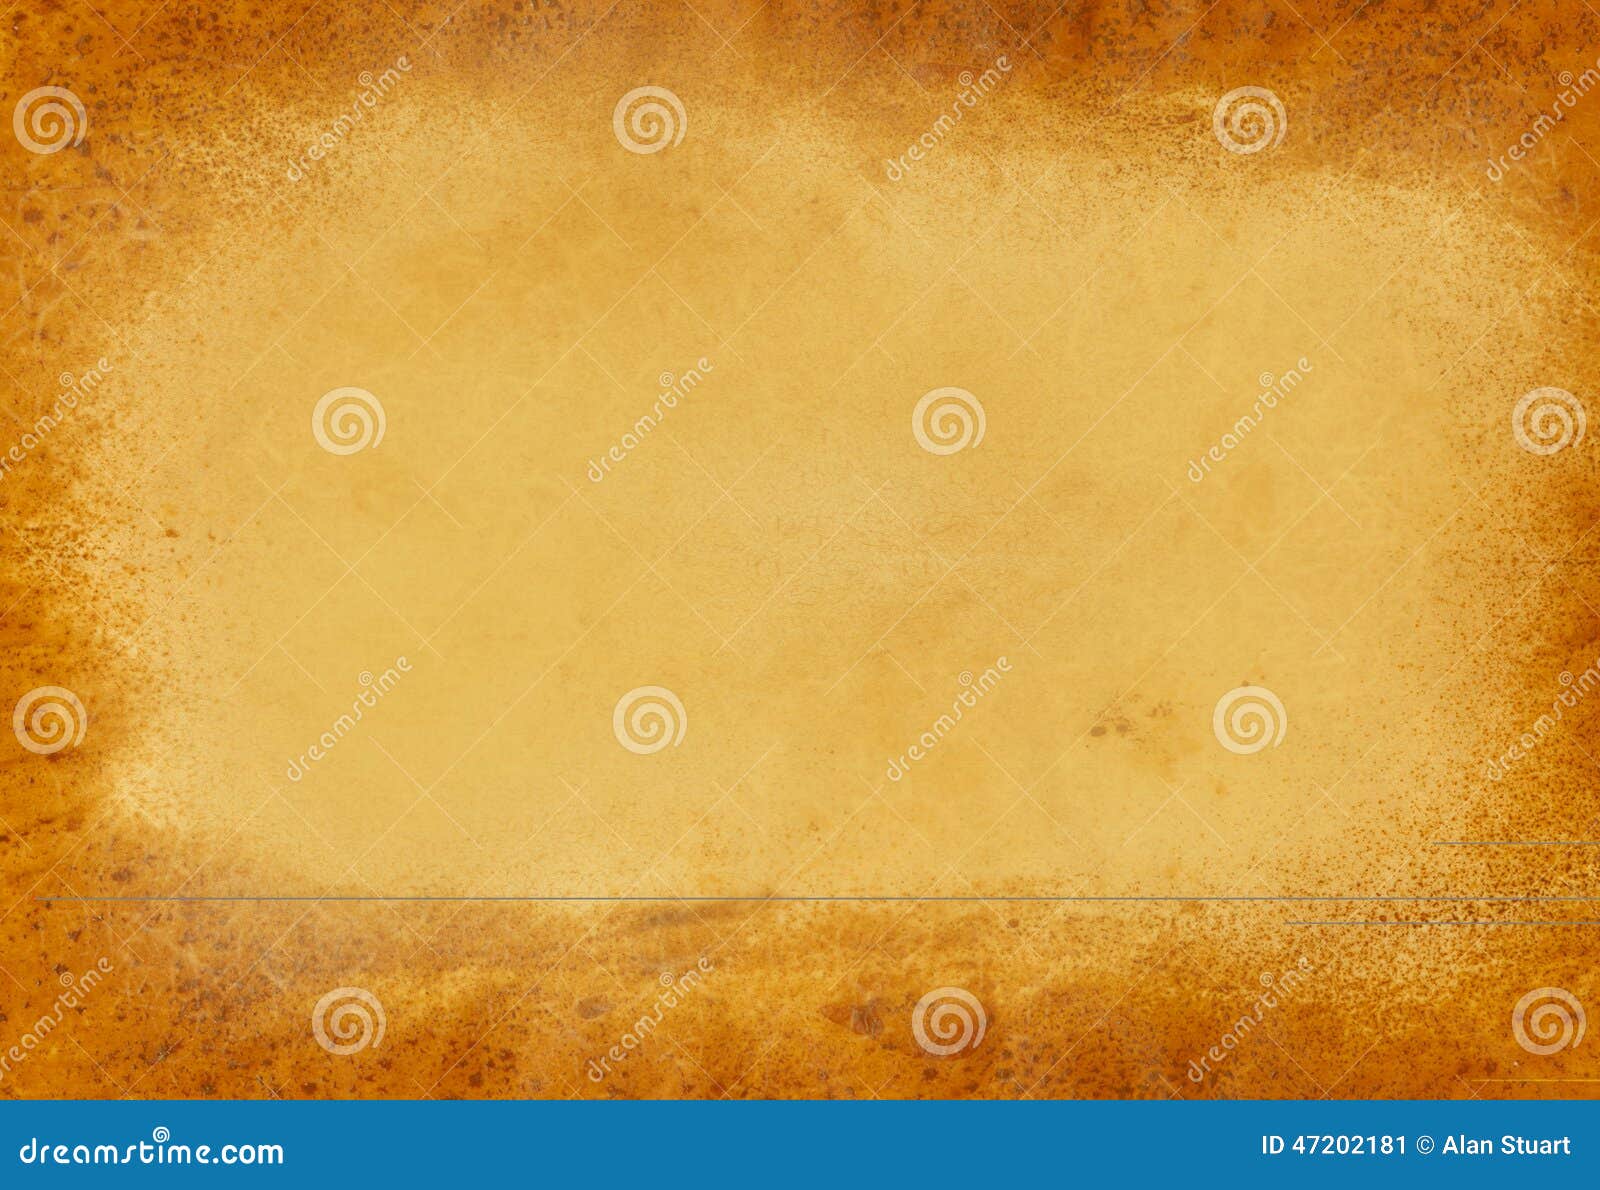 Brown Blank Background stock image. Image of card, message - 47202181